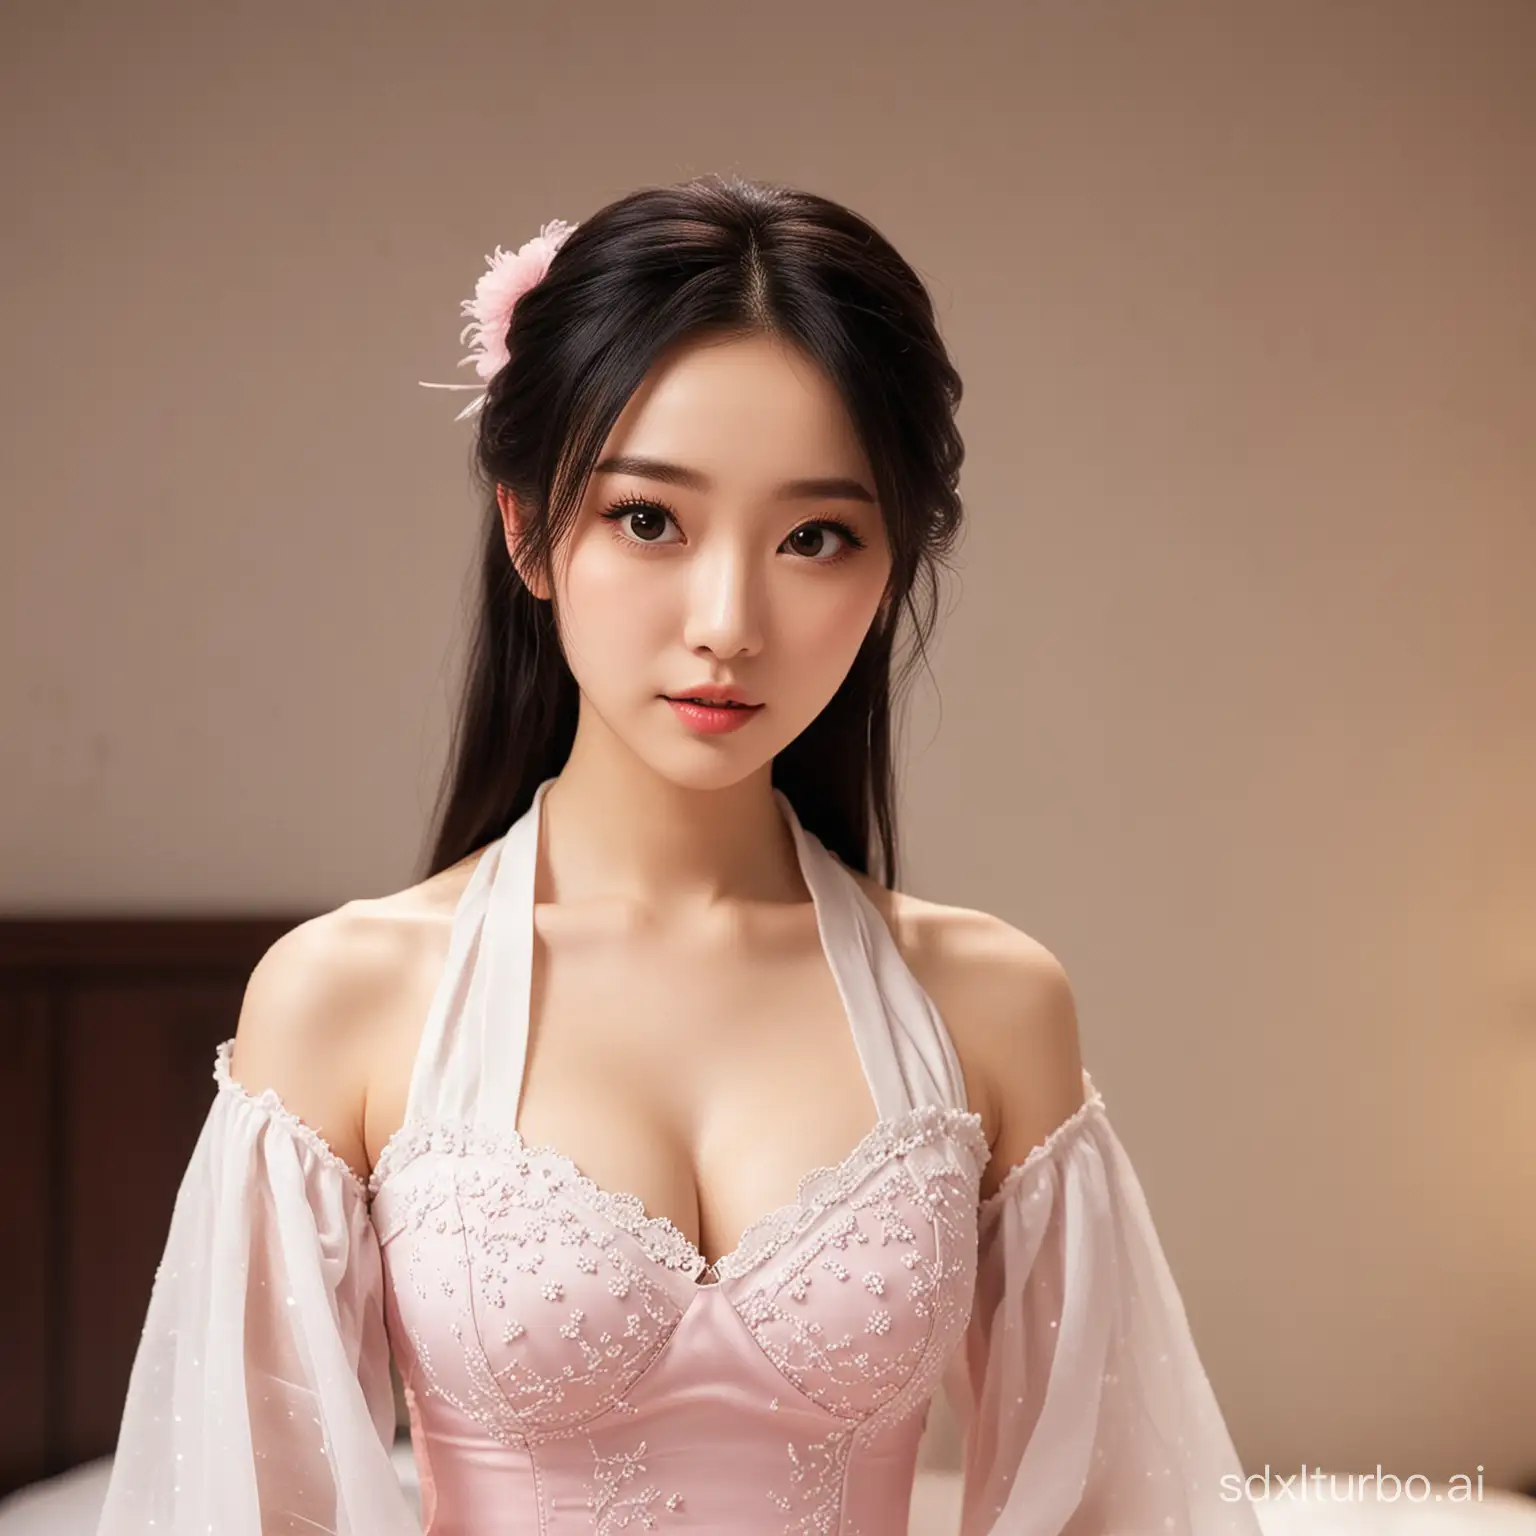 Doupo-Cangqiong-Xiaoyixian-Private-Room-Photos-Captivating-Animation-Art-in-HD